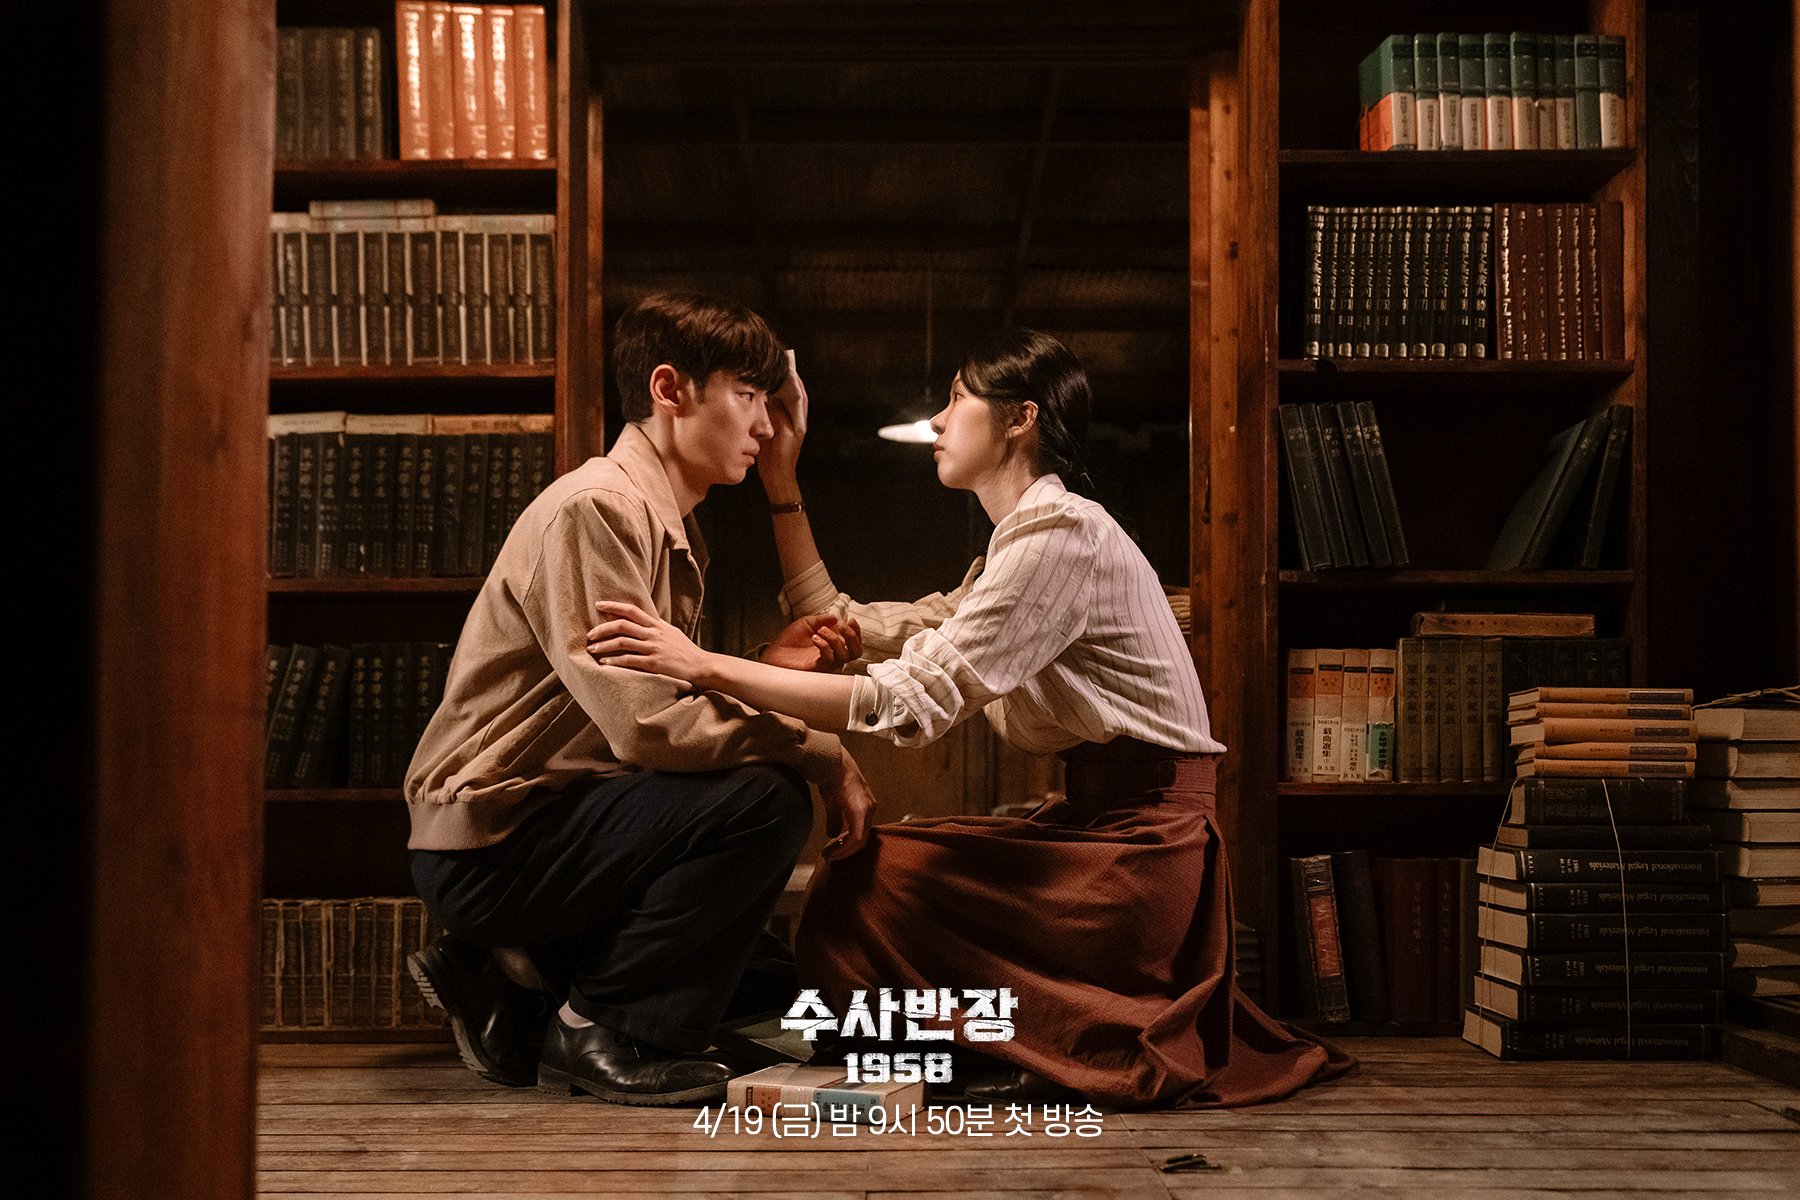 Sparks Fly Between Lee Je Hoon And Seo Eun Soo During Their First Encounter In 